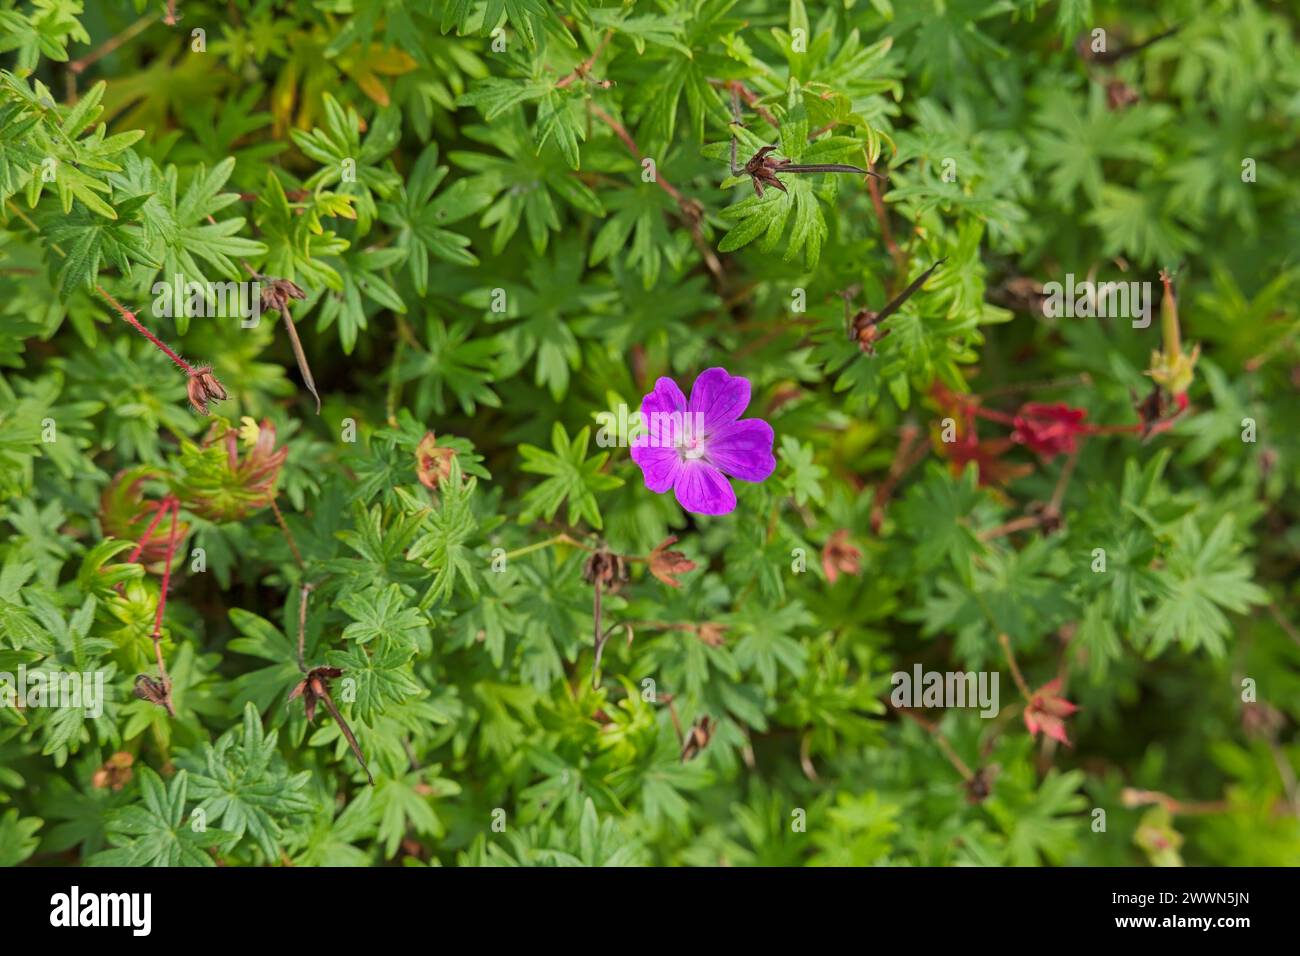 Closeup of Erodium manescavi, called the garden stork's-bill, Manescau storksbill, Manescau heronsbill and showy heron's bill, is a species of floweri Stock Photo